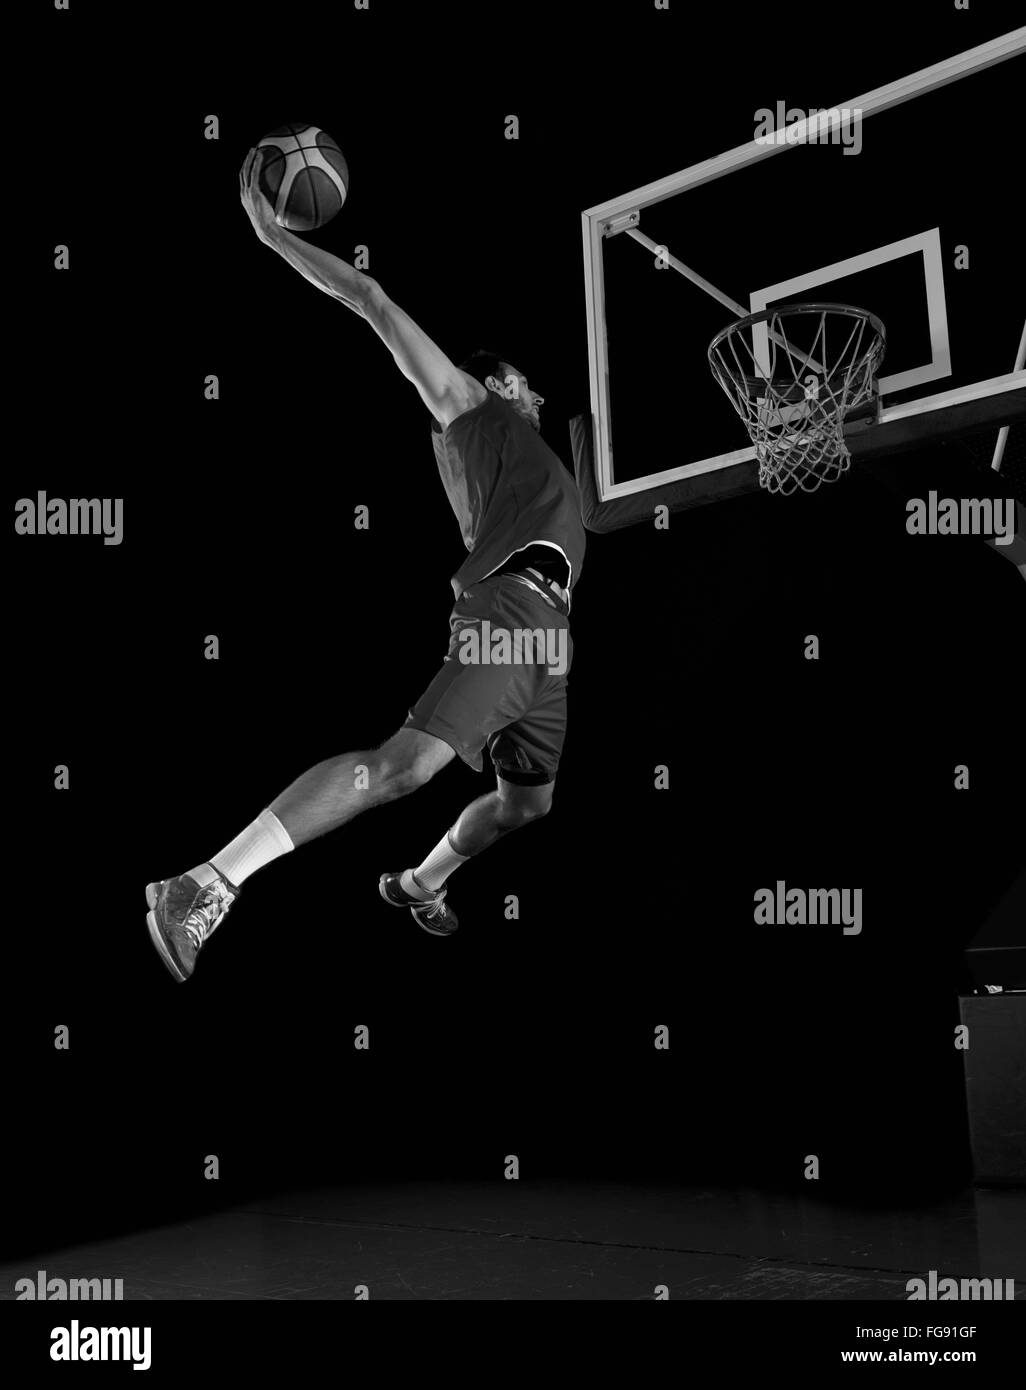 basketball player in action Stock Photo